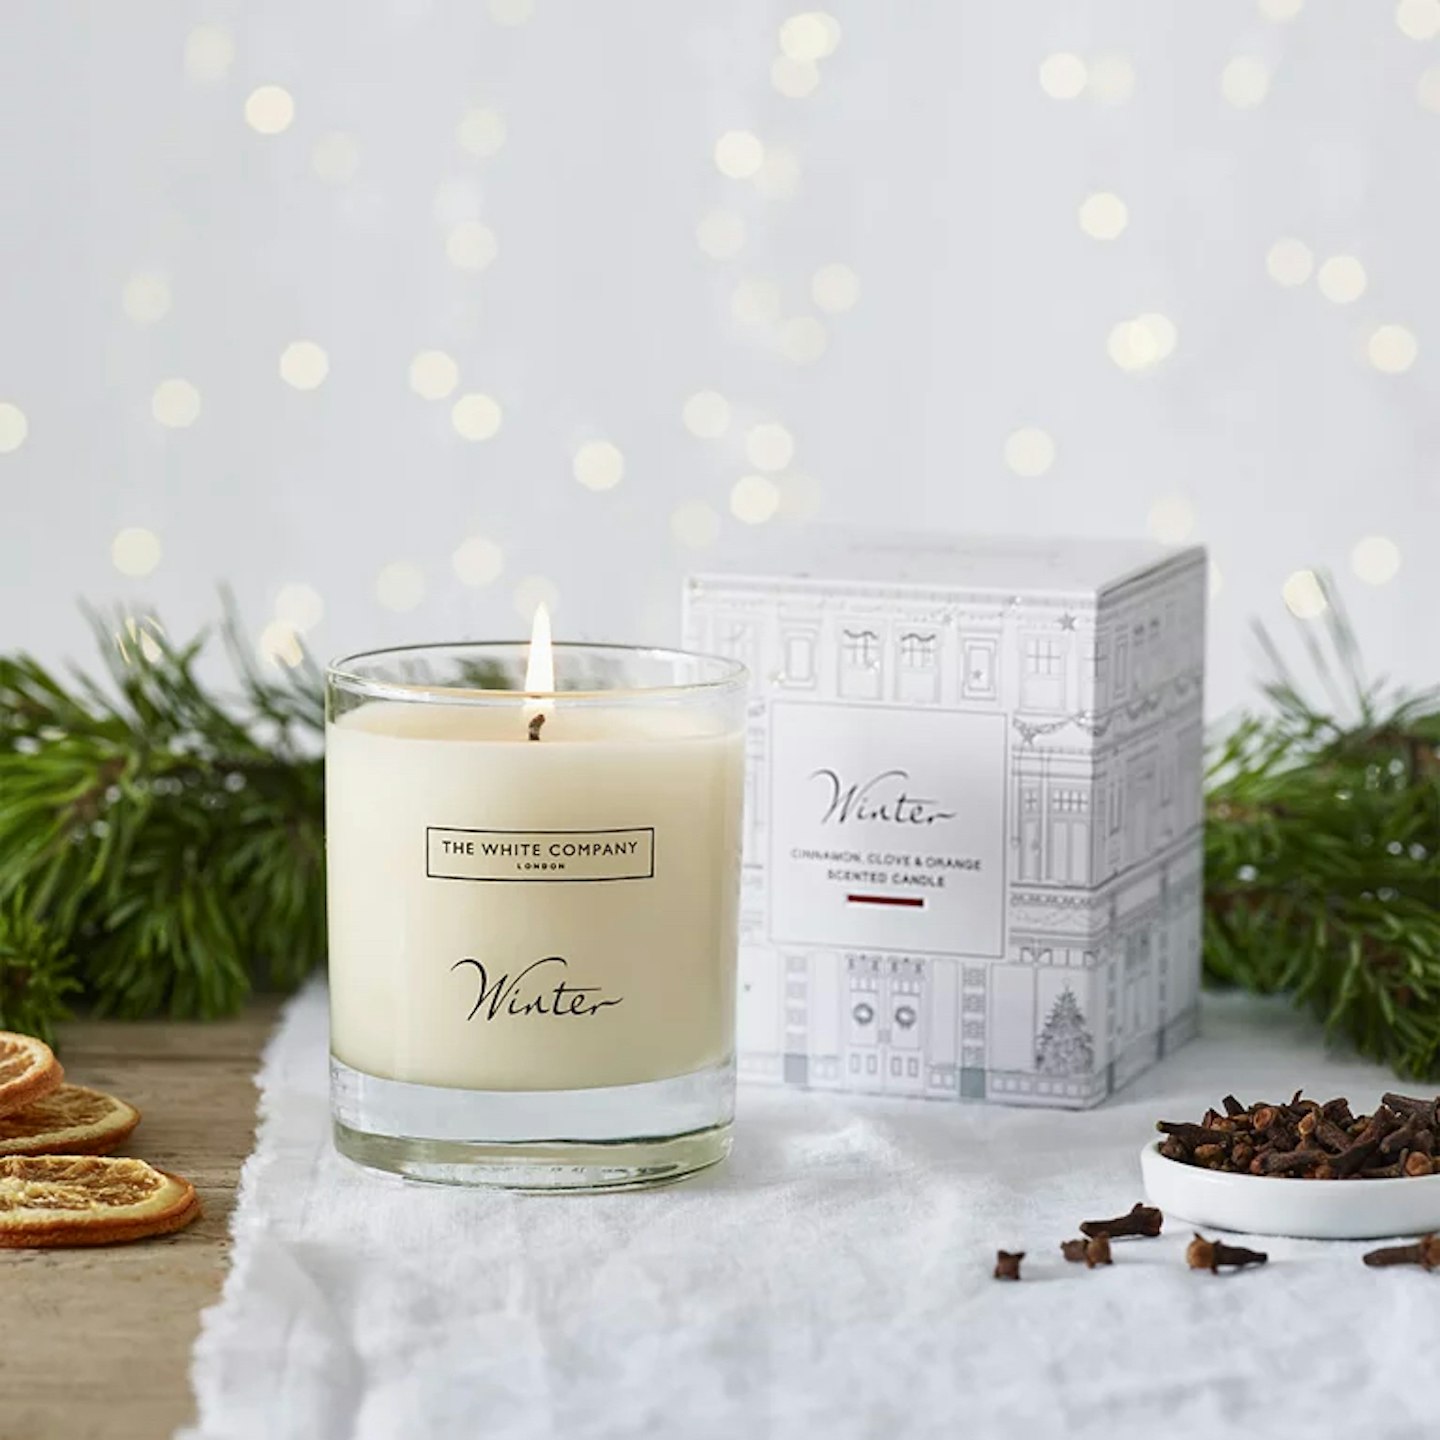 The white company winter candle 